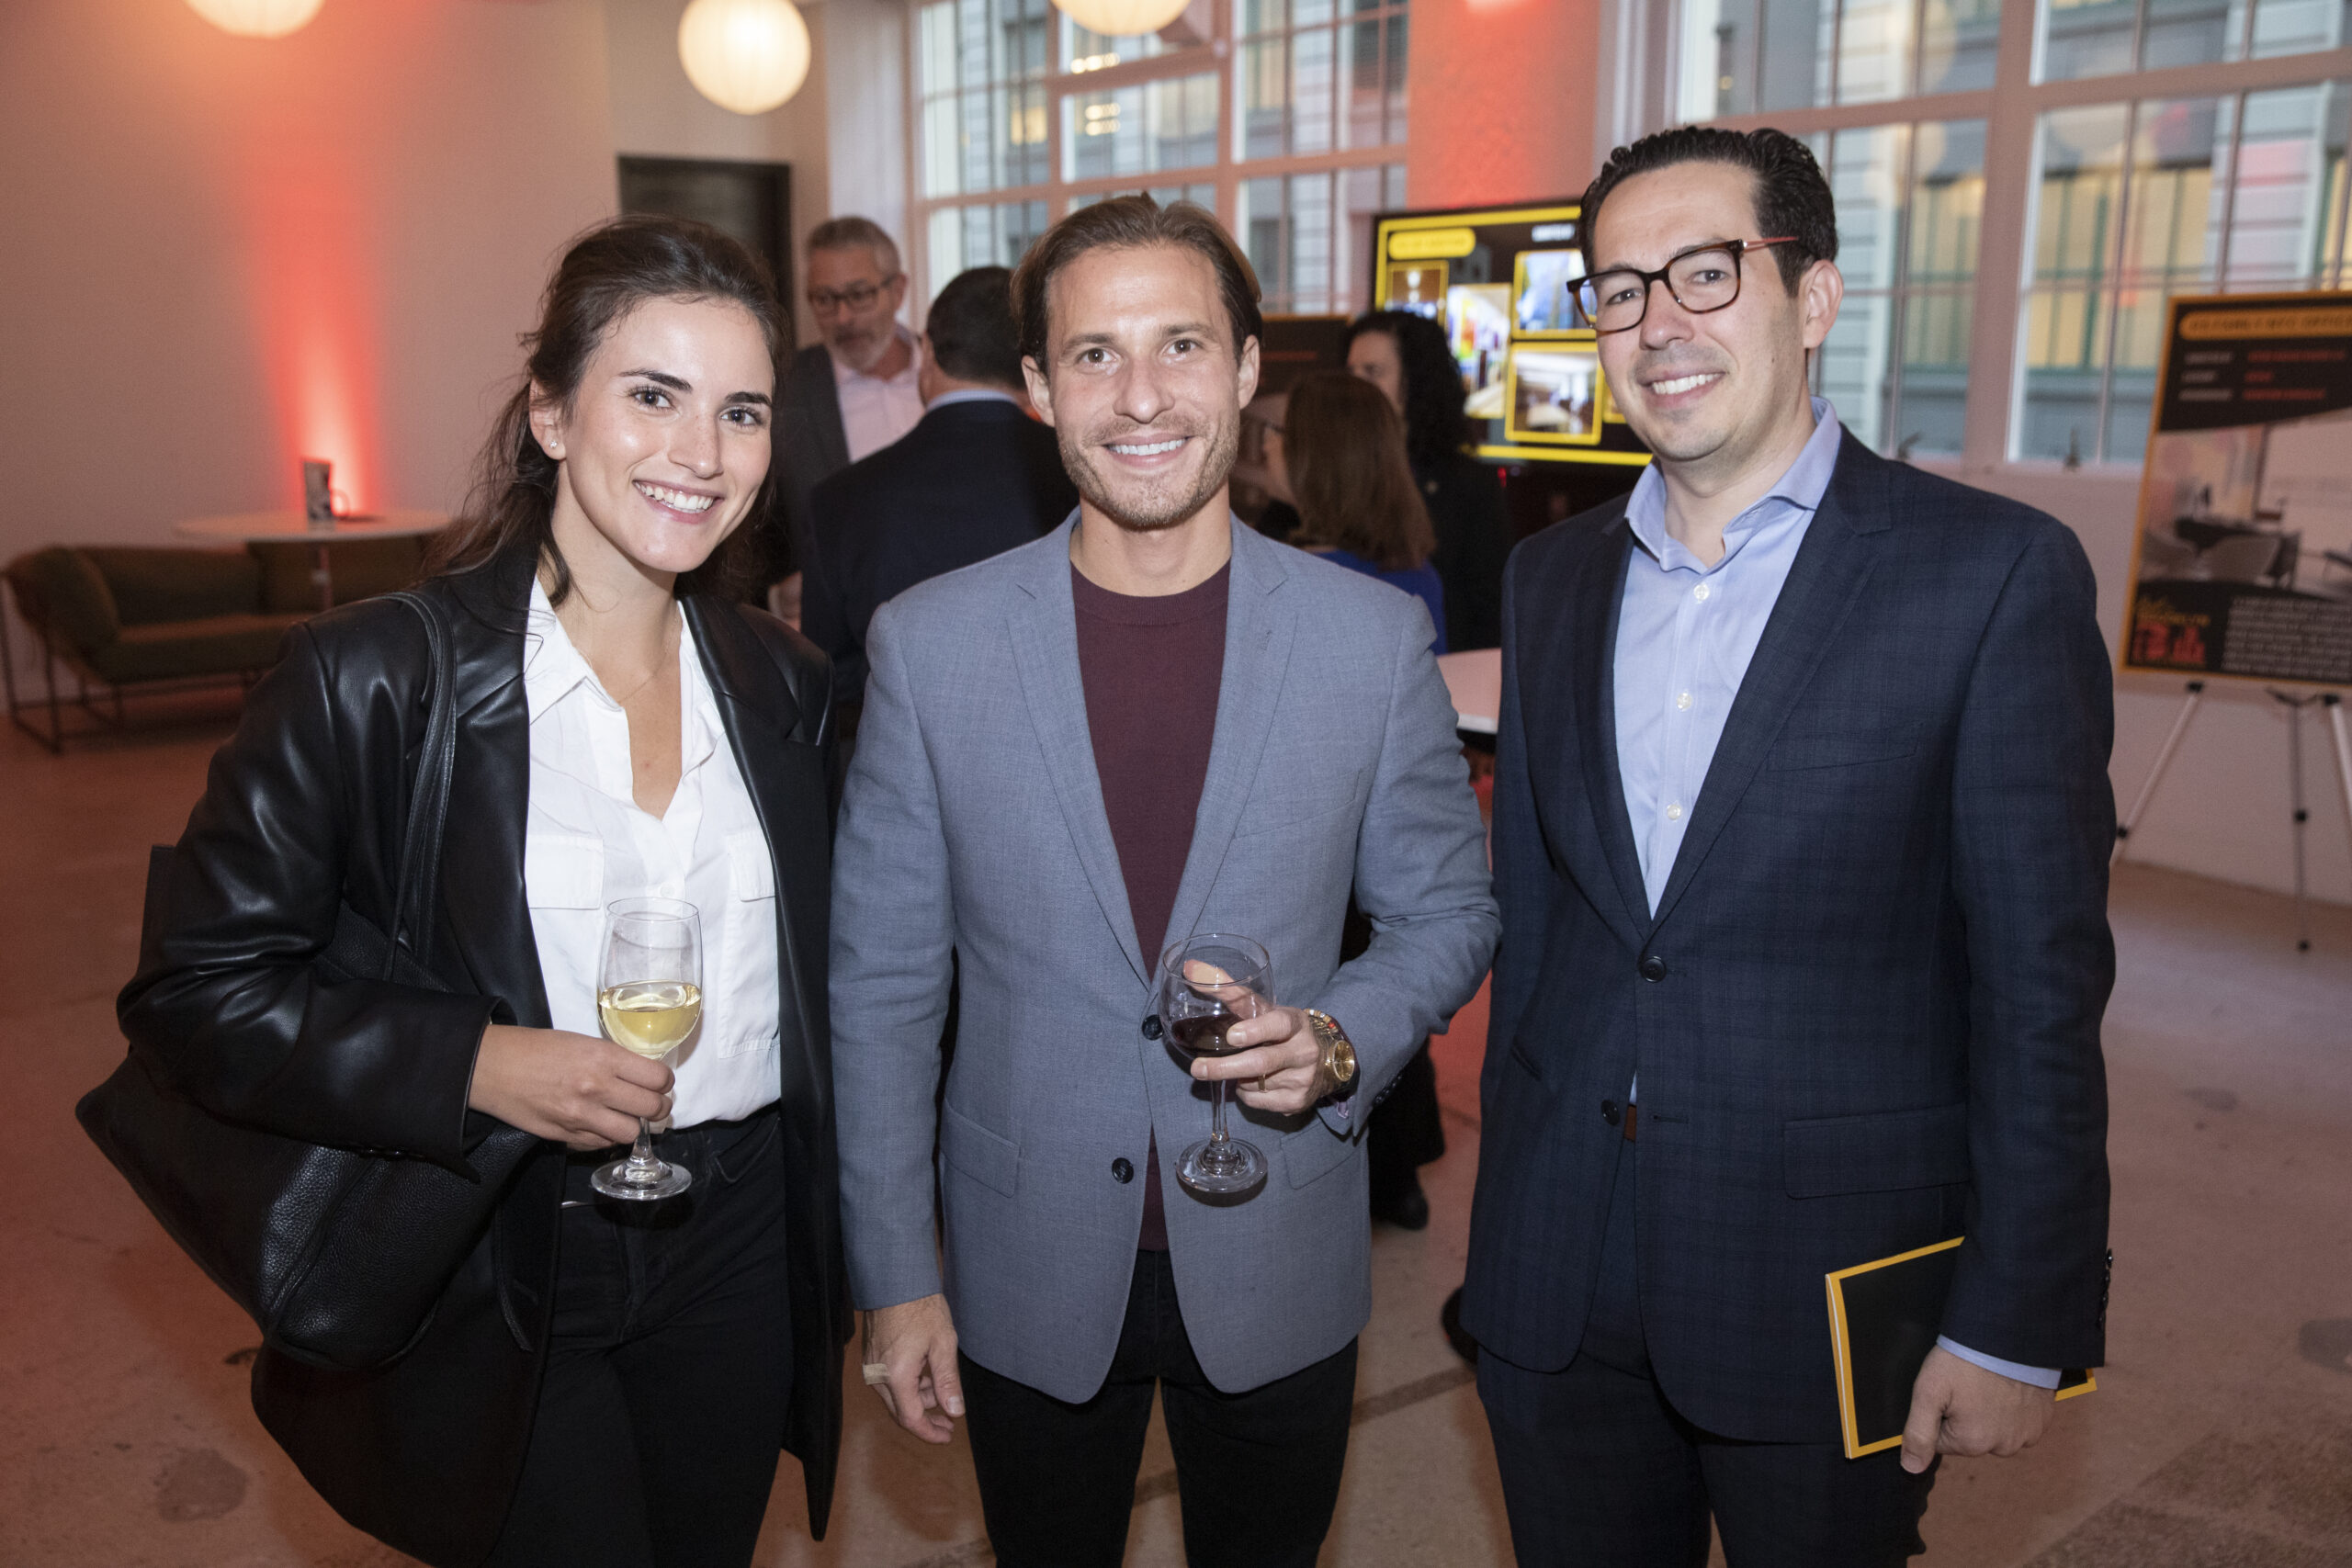 Nicole Serras, Jarad Winter and another guest at Best of Brooklyn Real Estate Showcase.